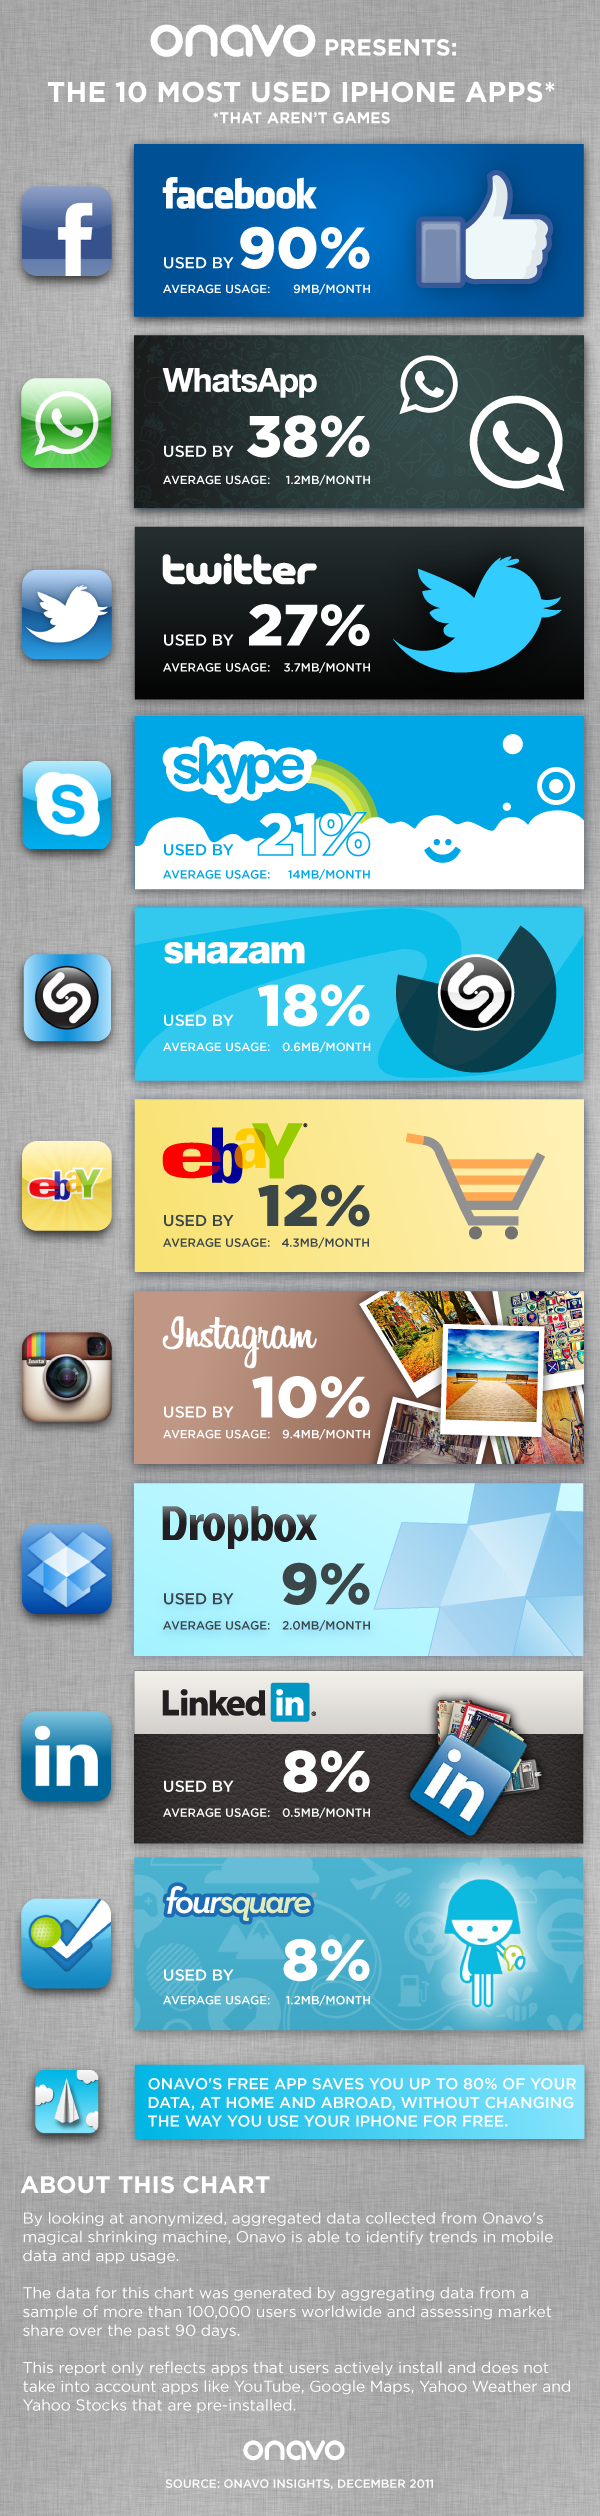 Top 10 Most Used iPhone Apps Visual.ly